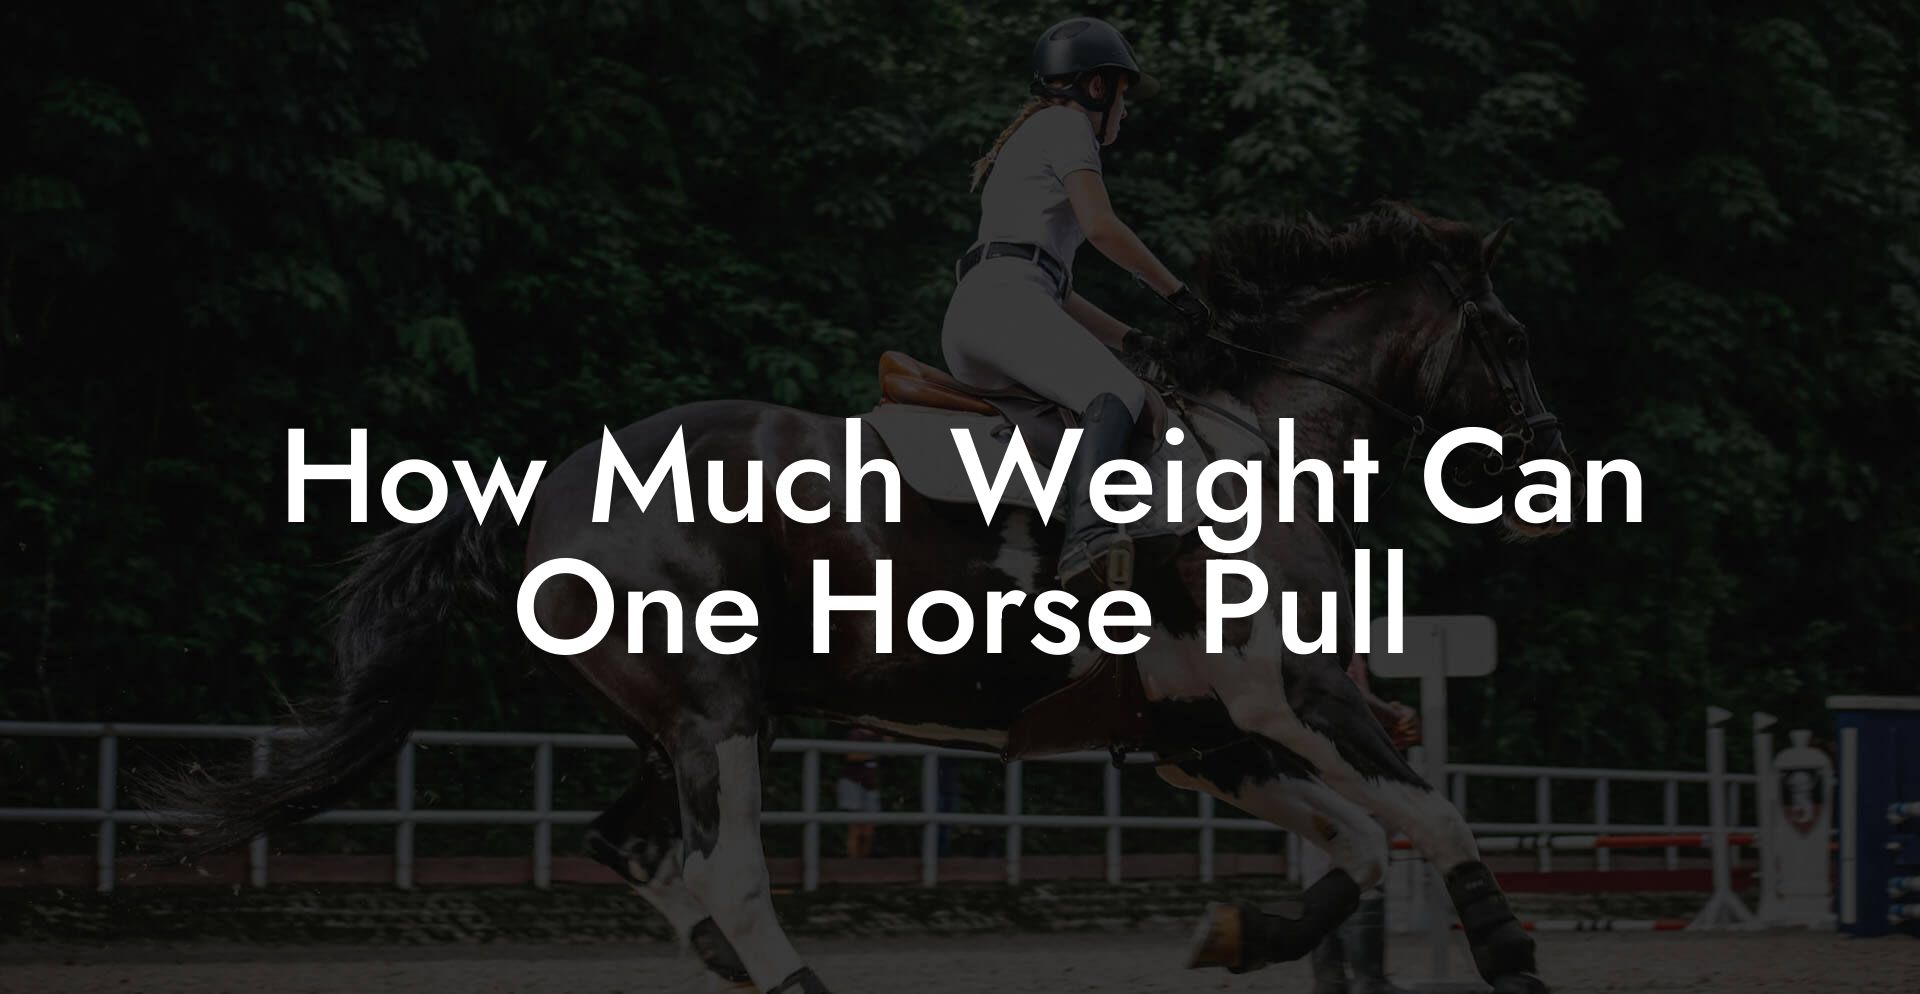 How Much Weight Can One Horse Pull